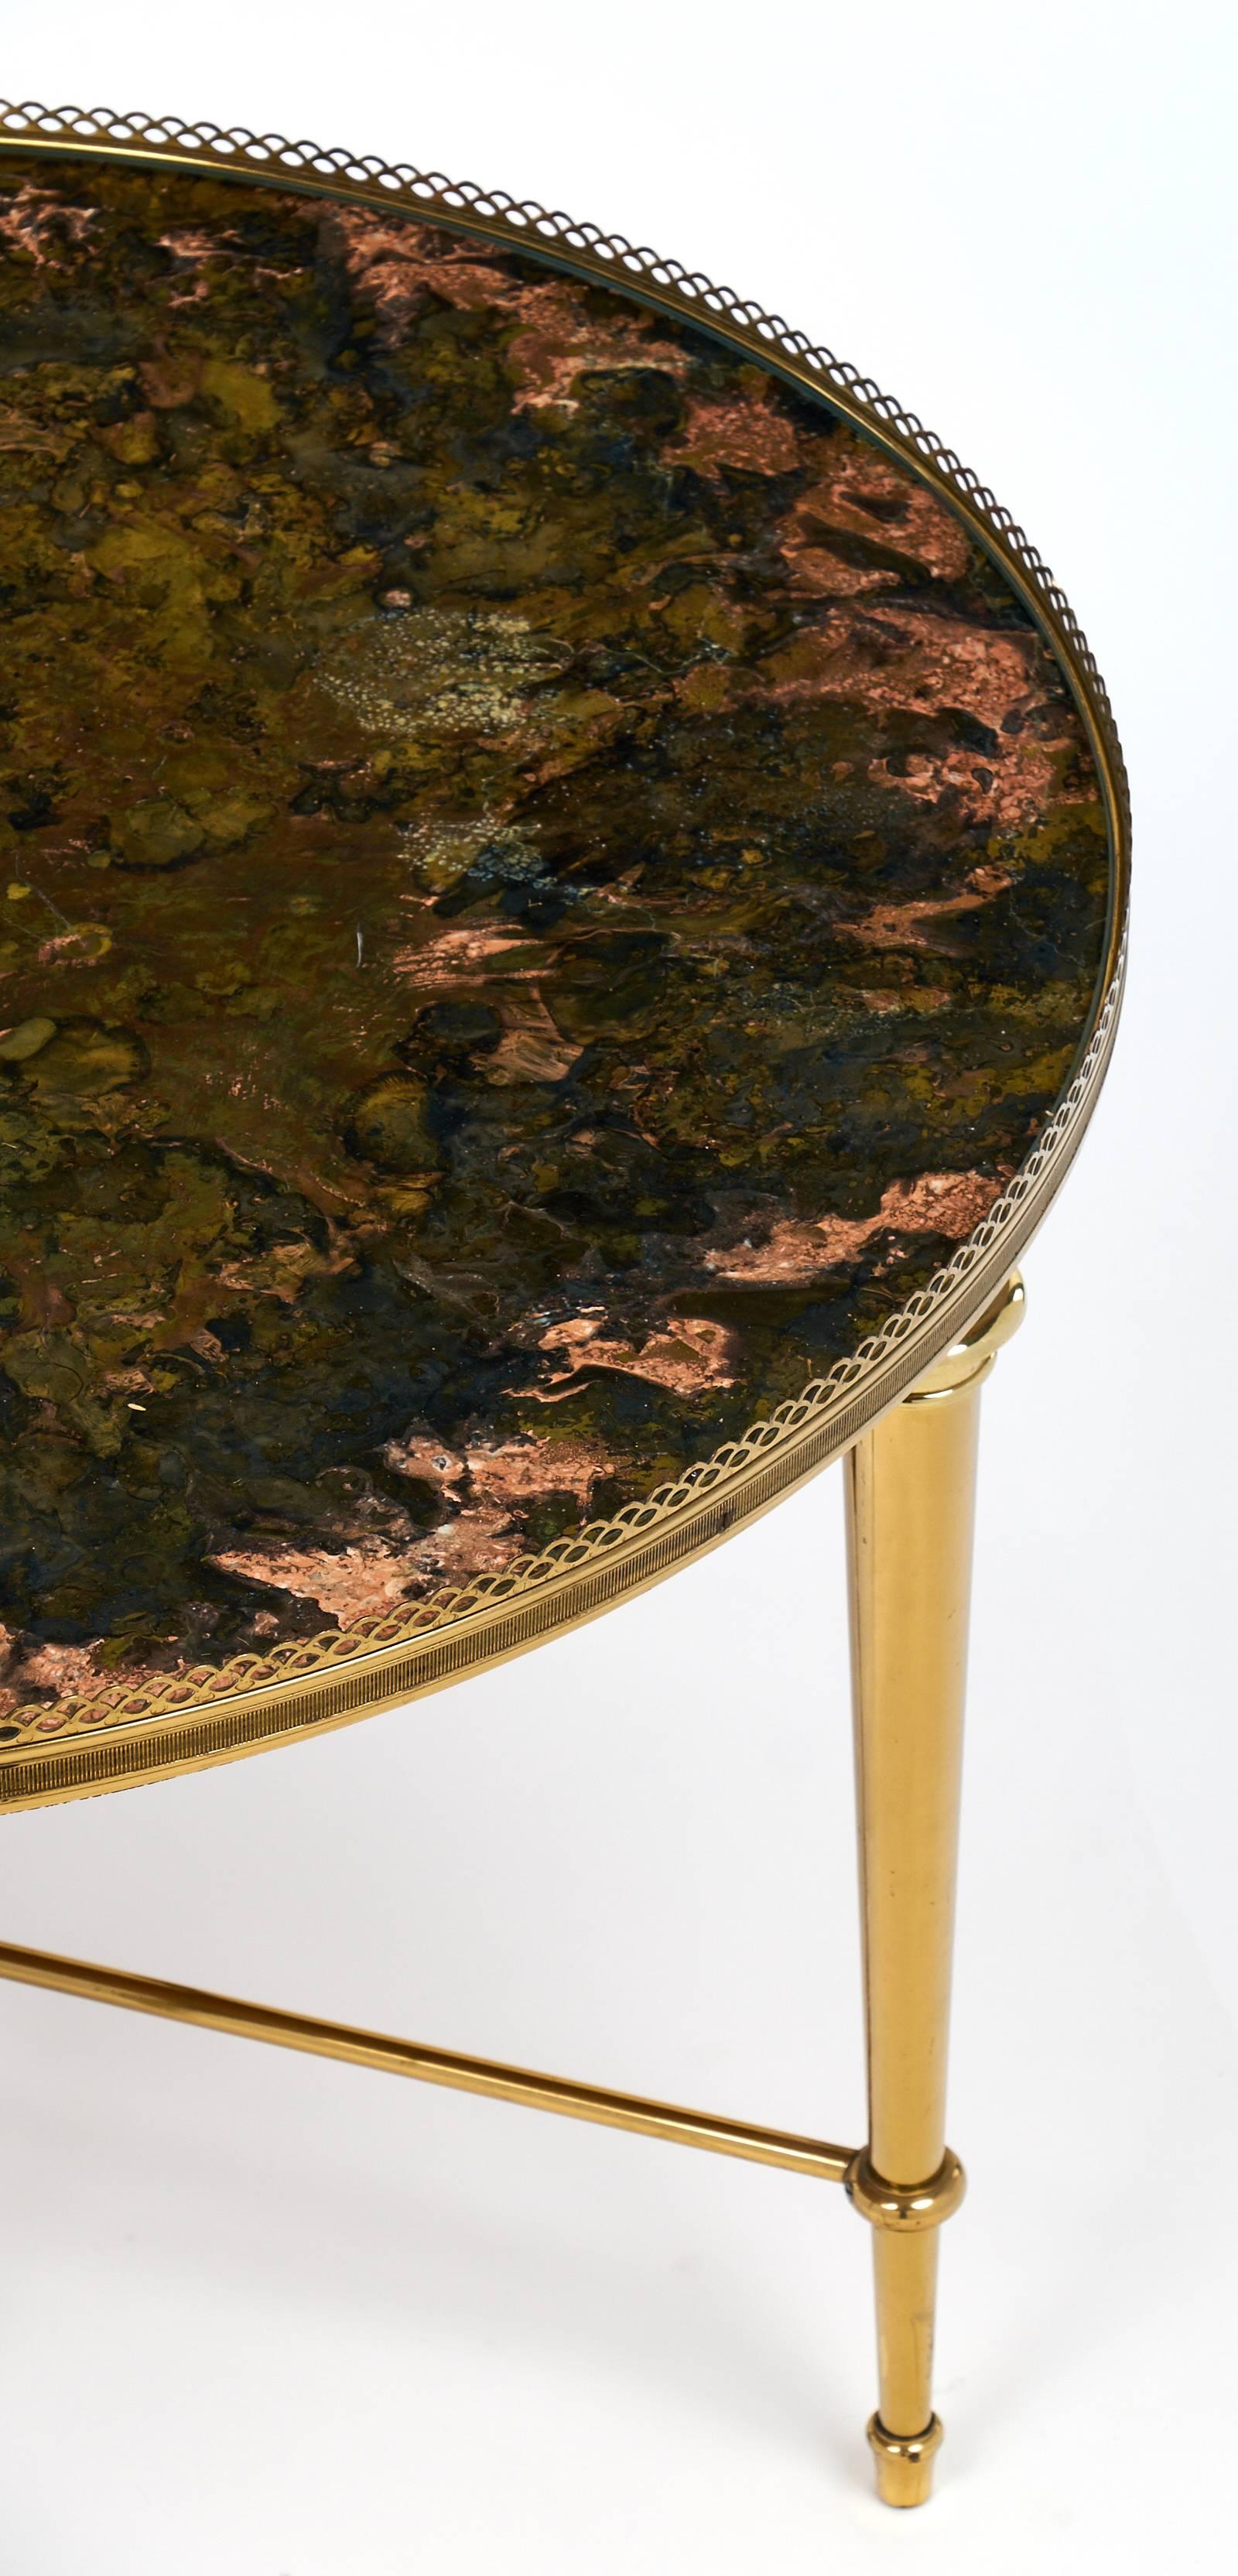 High quality solid brass vintage side table with brass gallery by Maison Ramsay. This table has tapered brass legs and a beautiful warm finish. We love the gold leaf in reverse finish on the glass top. The artistic acid work on the gold leafing